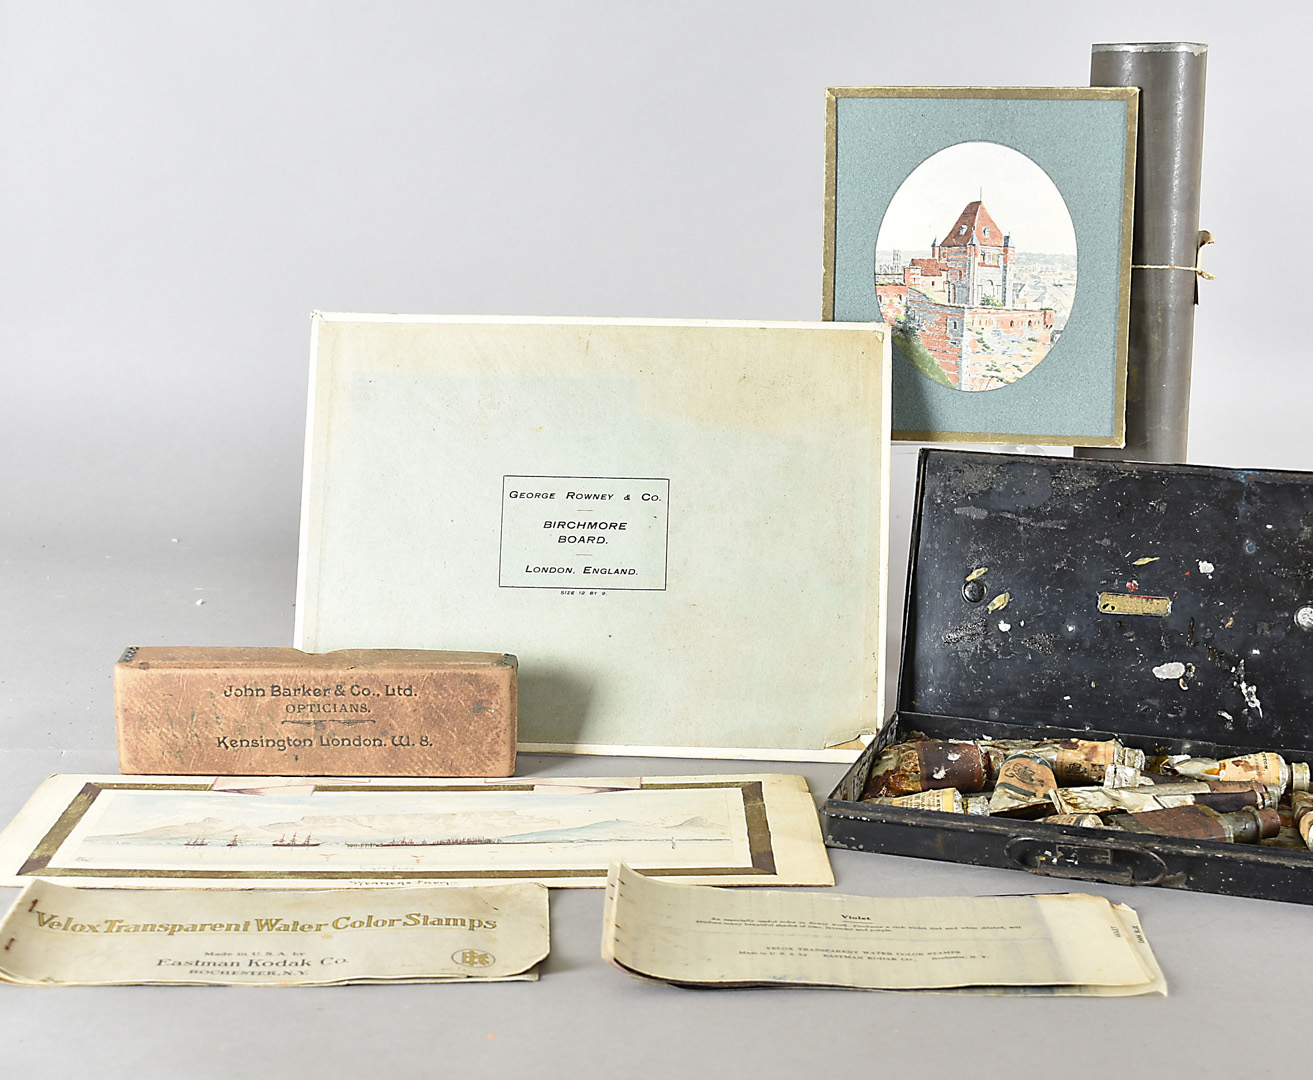 A collection of 19th century and early 20th century paints, paint brushes, including an enamel